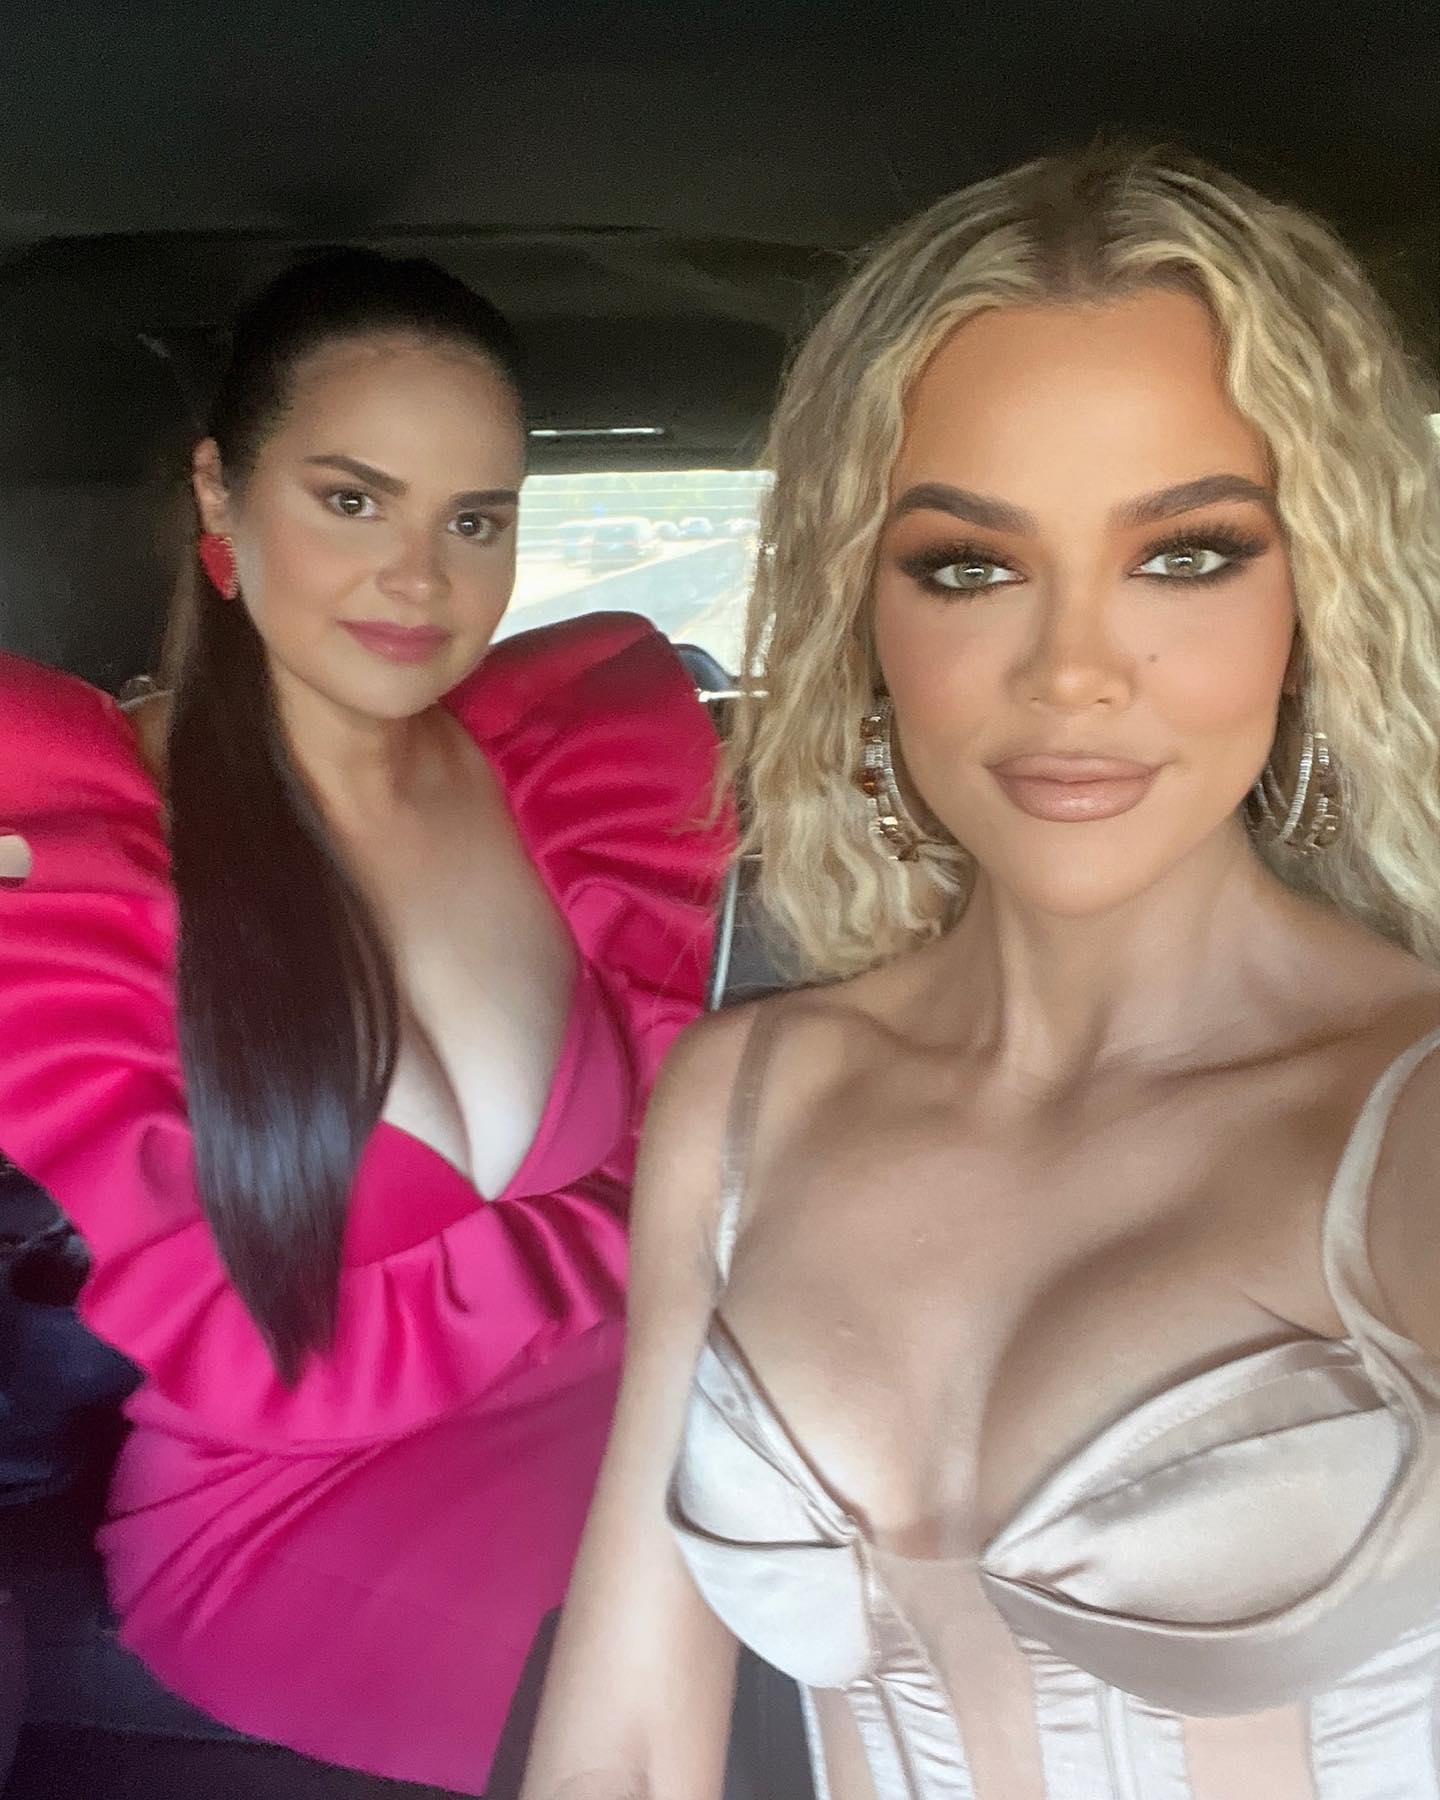 Khloe recently celebrated her birthday with her nanny Andreza and other friends